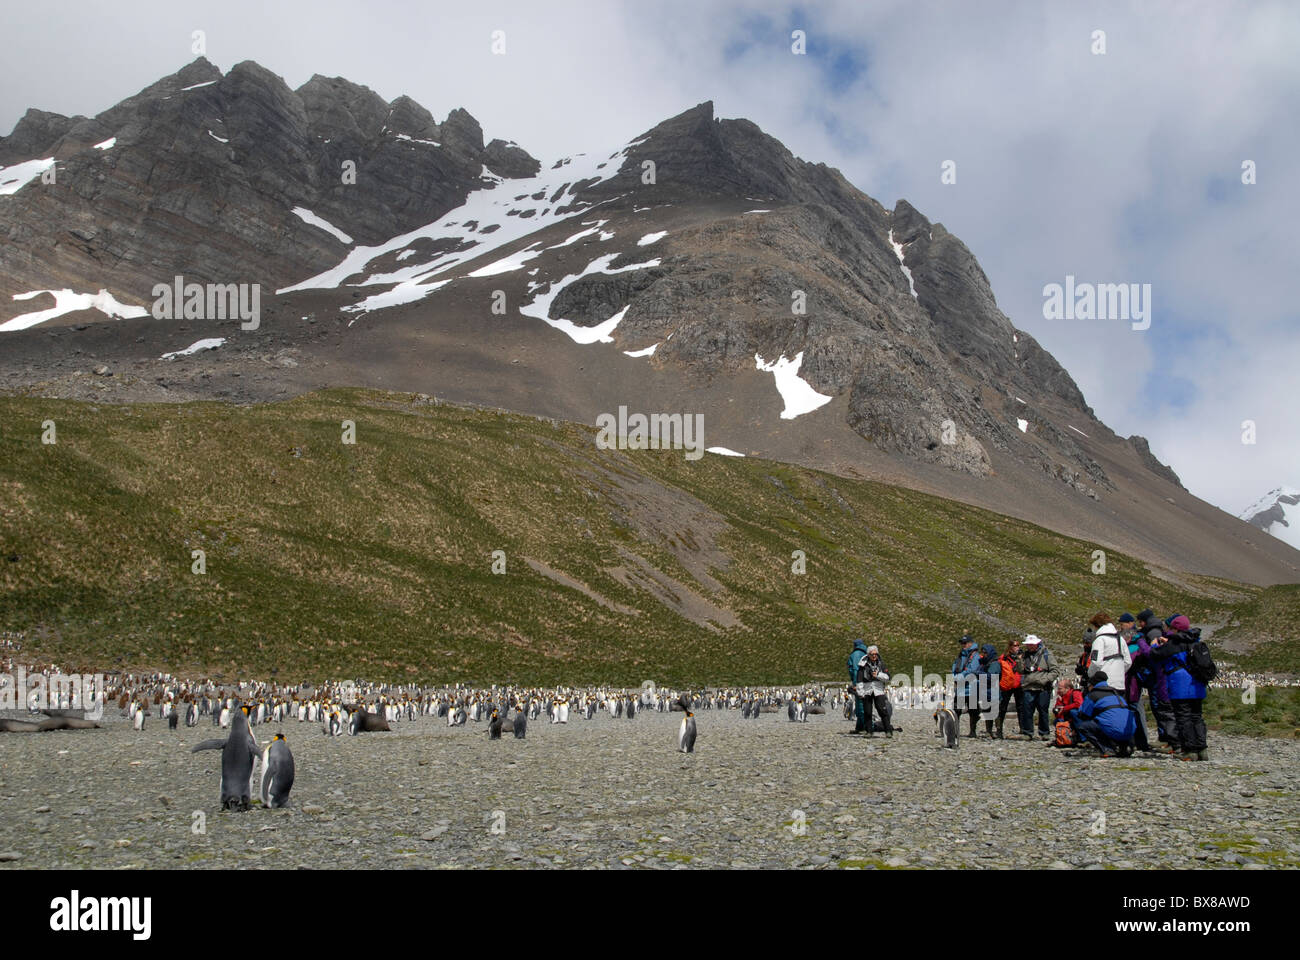 Tourists at the huge King Penguin colony at Right Whale Bay, South Georgia Stock Photo